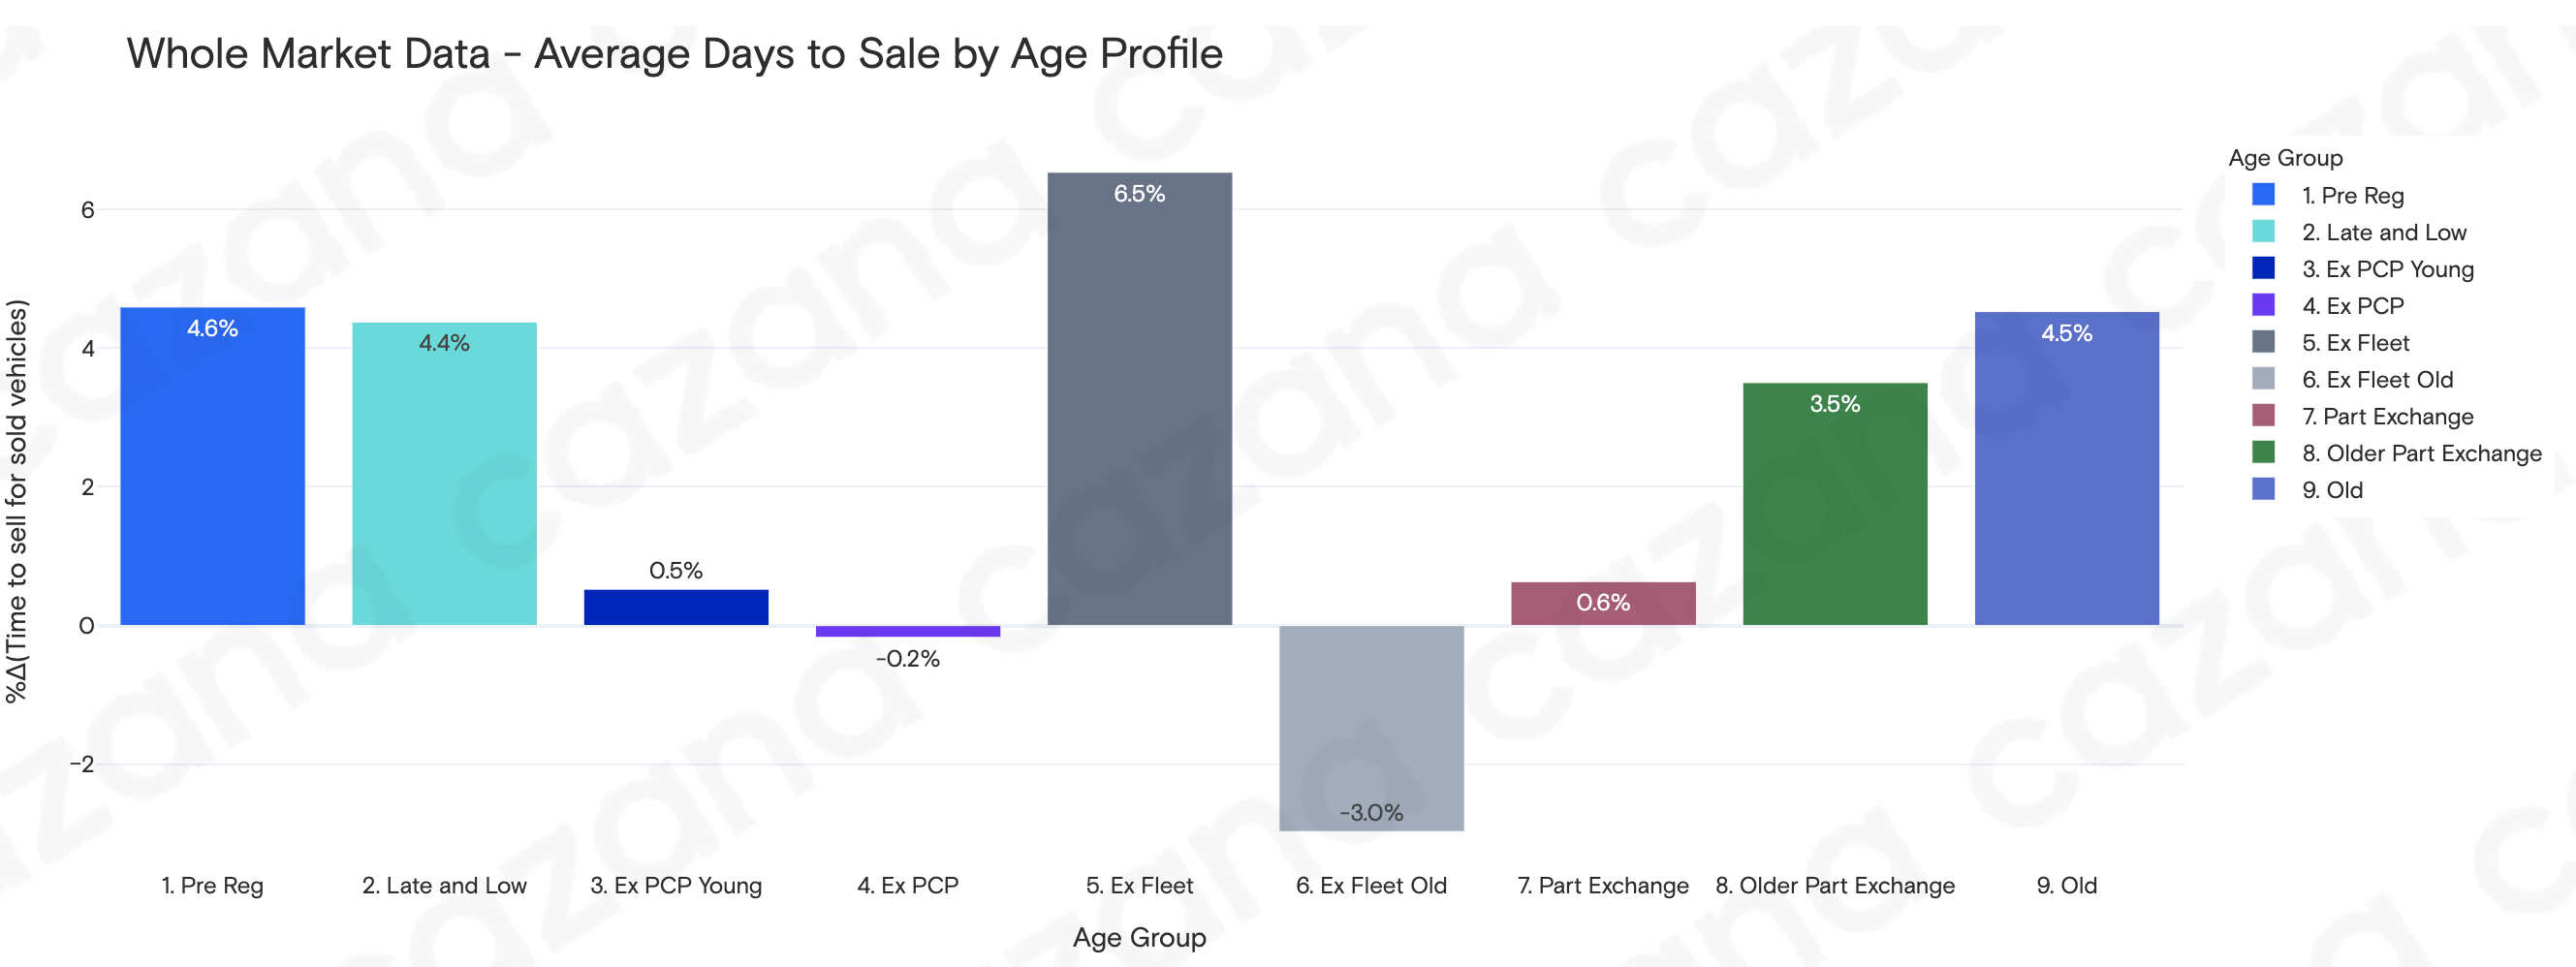 Average Days to Sale by Age Profile